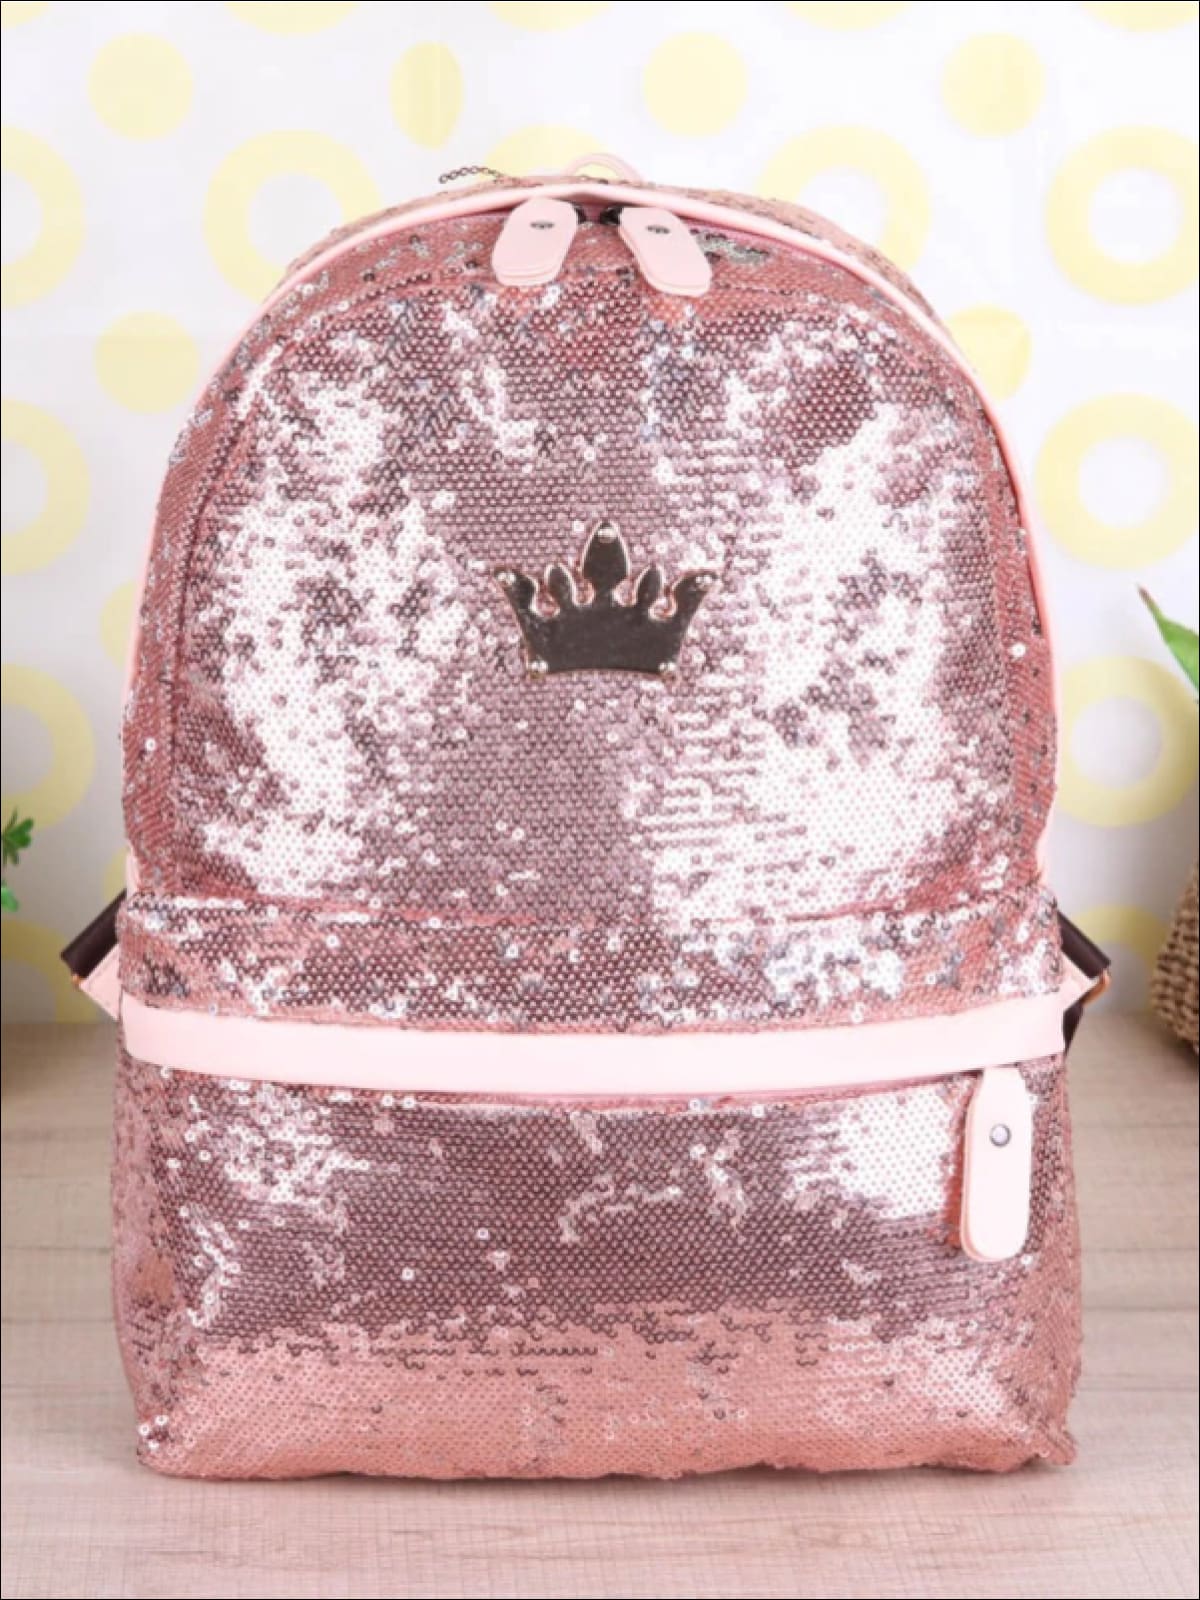 Girls 15 Sequined Backpack with Crown Applique - Girls Backpack